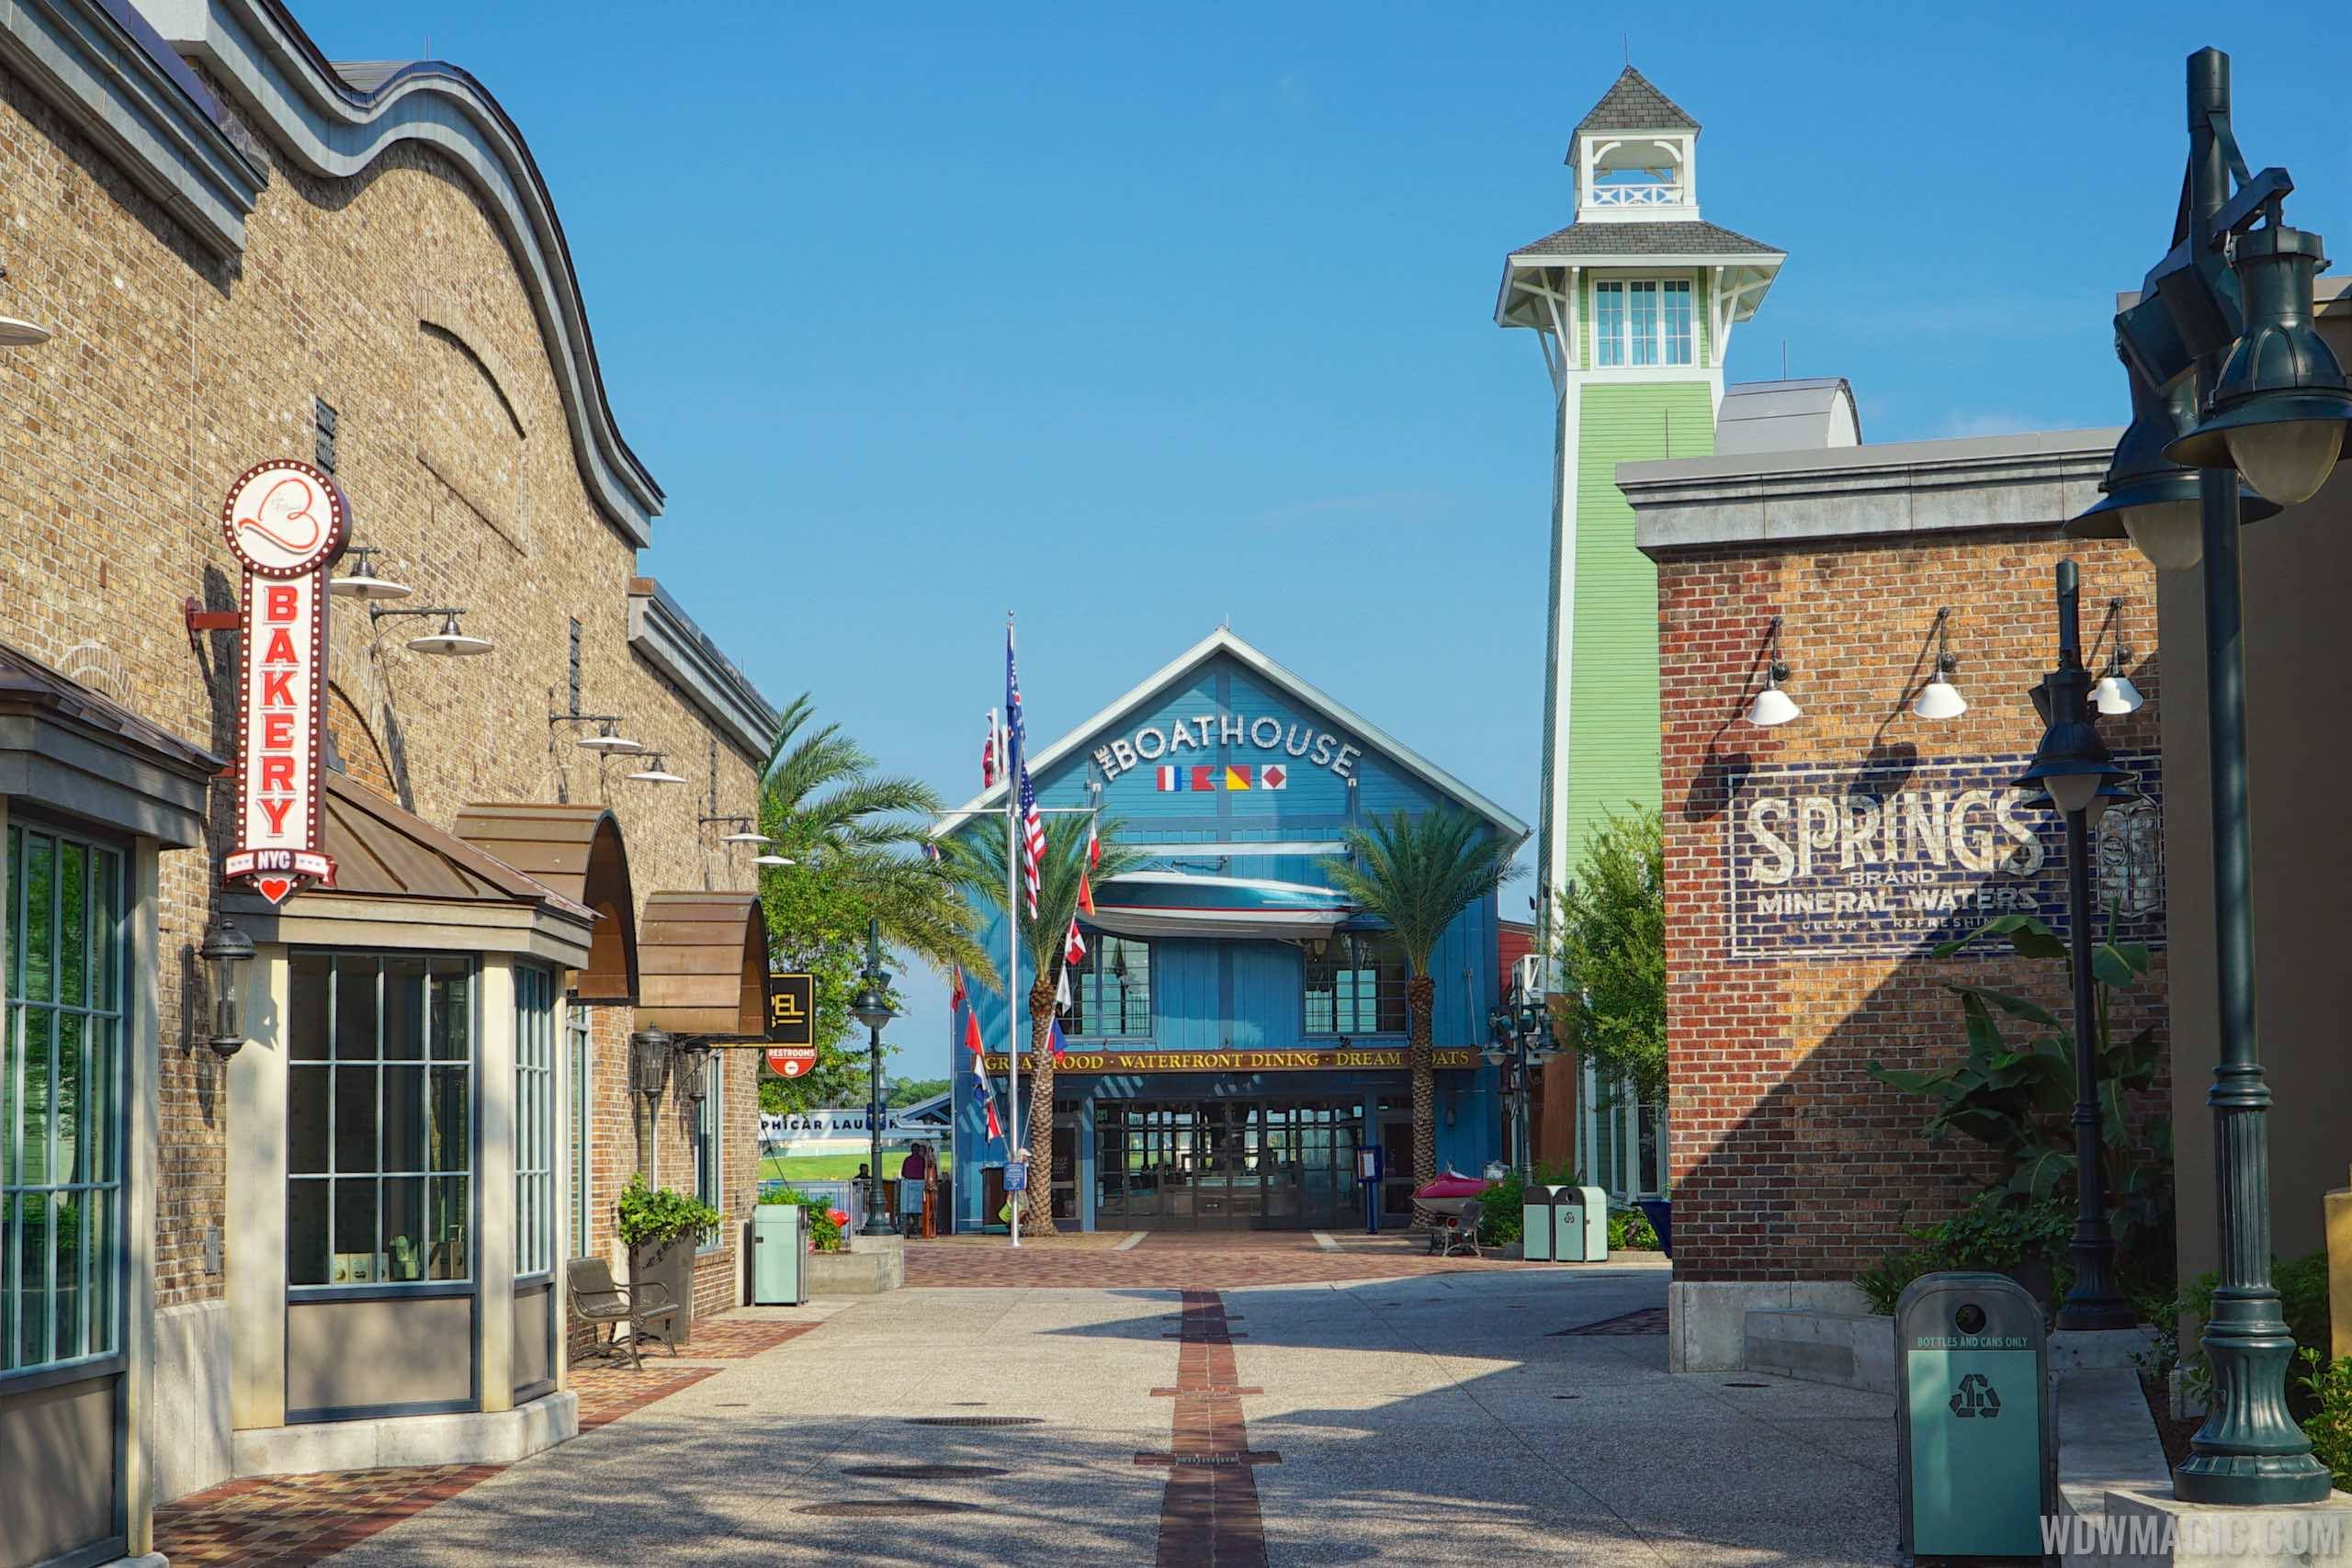 Disney Springs will offer longer hours on Fridays and Saturdays